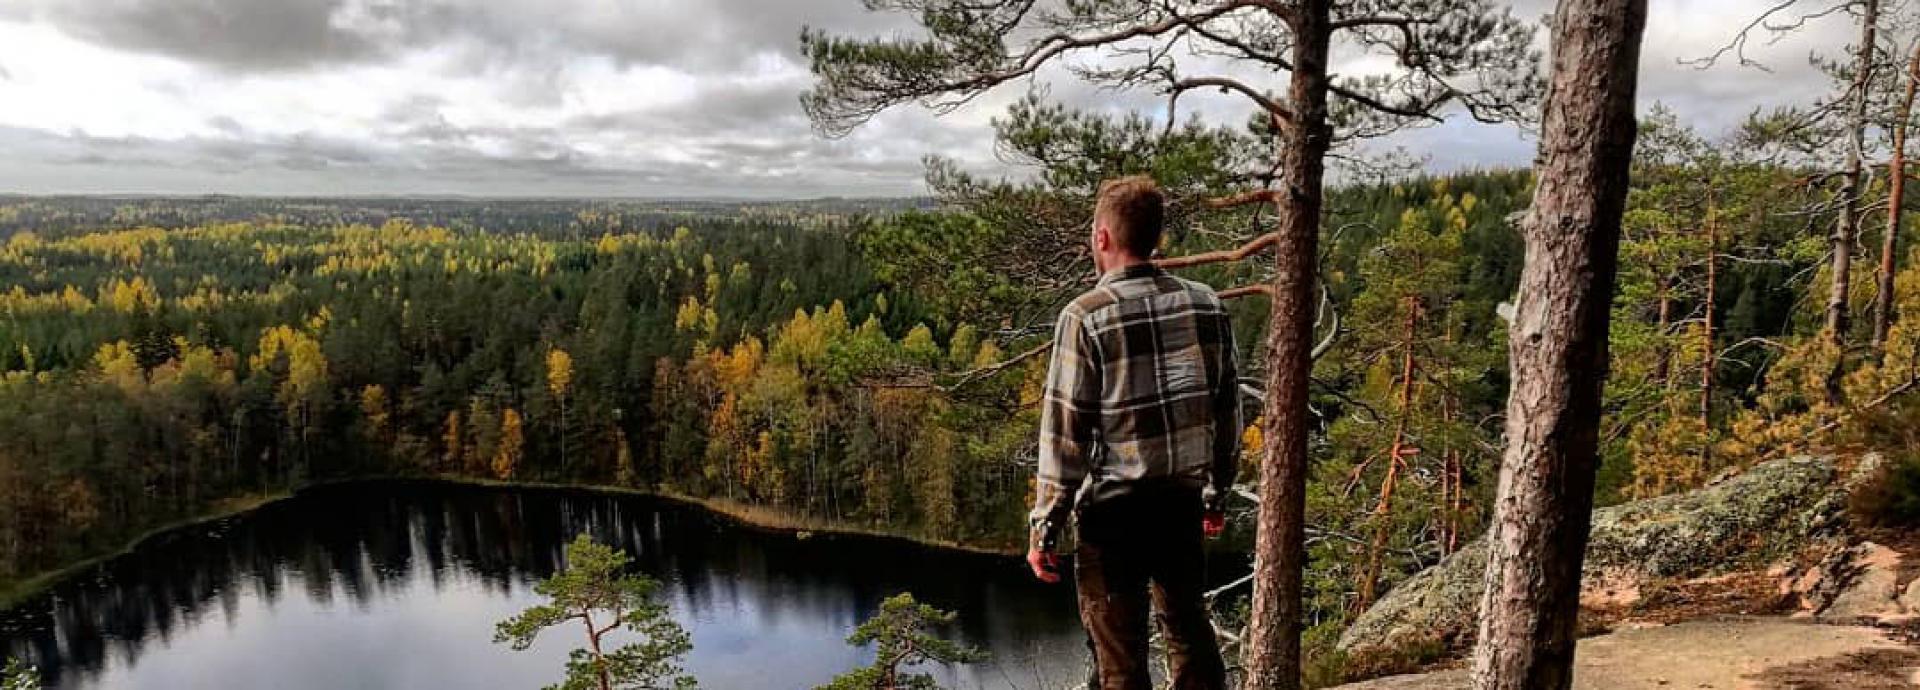 U.S. Fulbright Student Andrew House in the Finnish forest